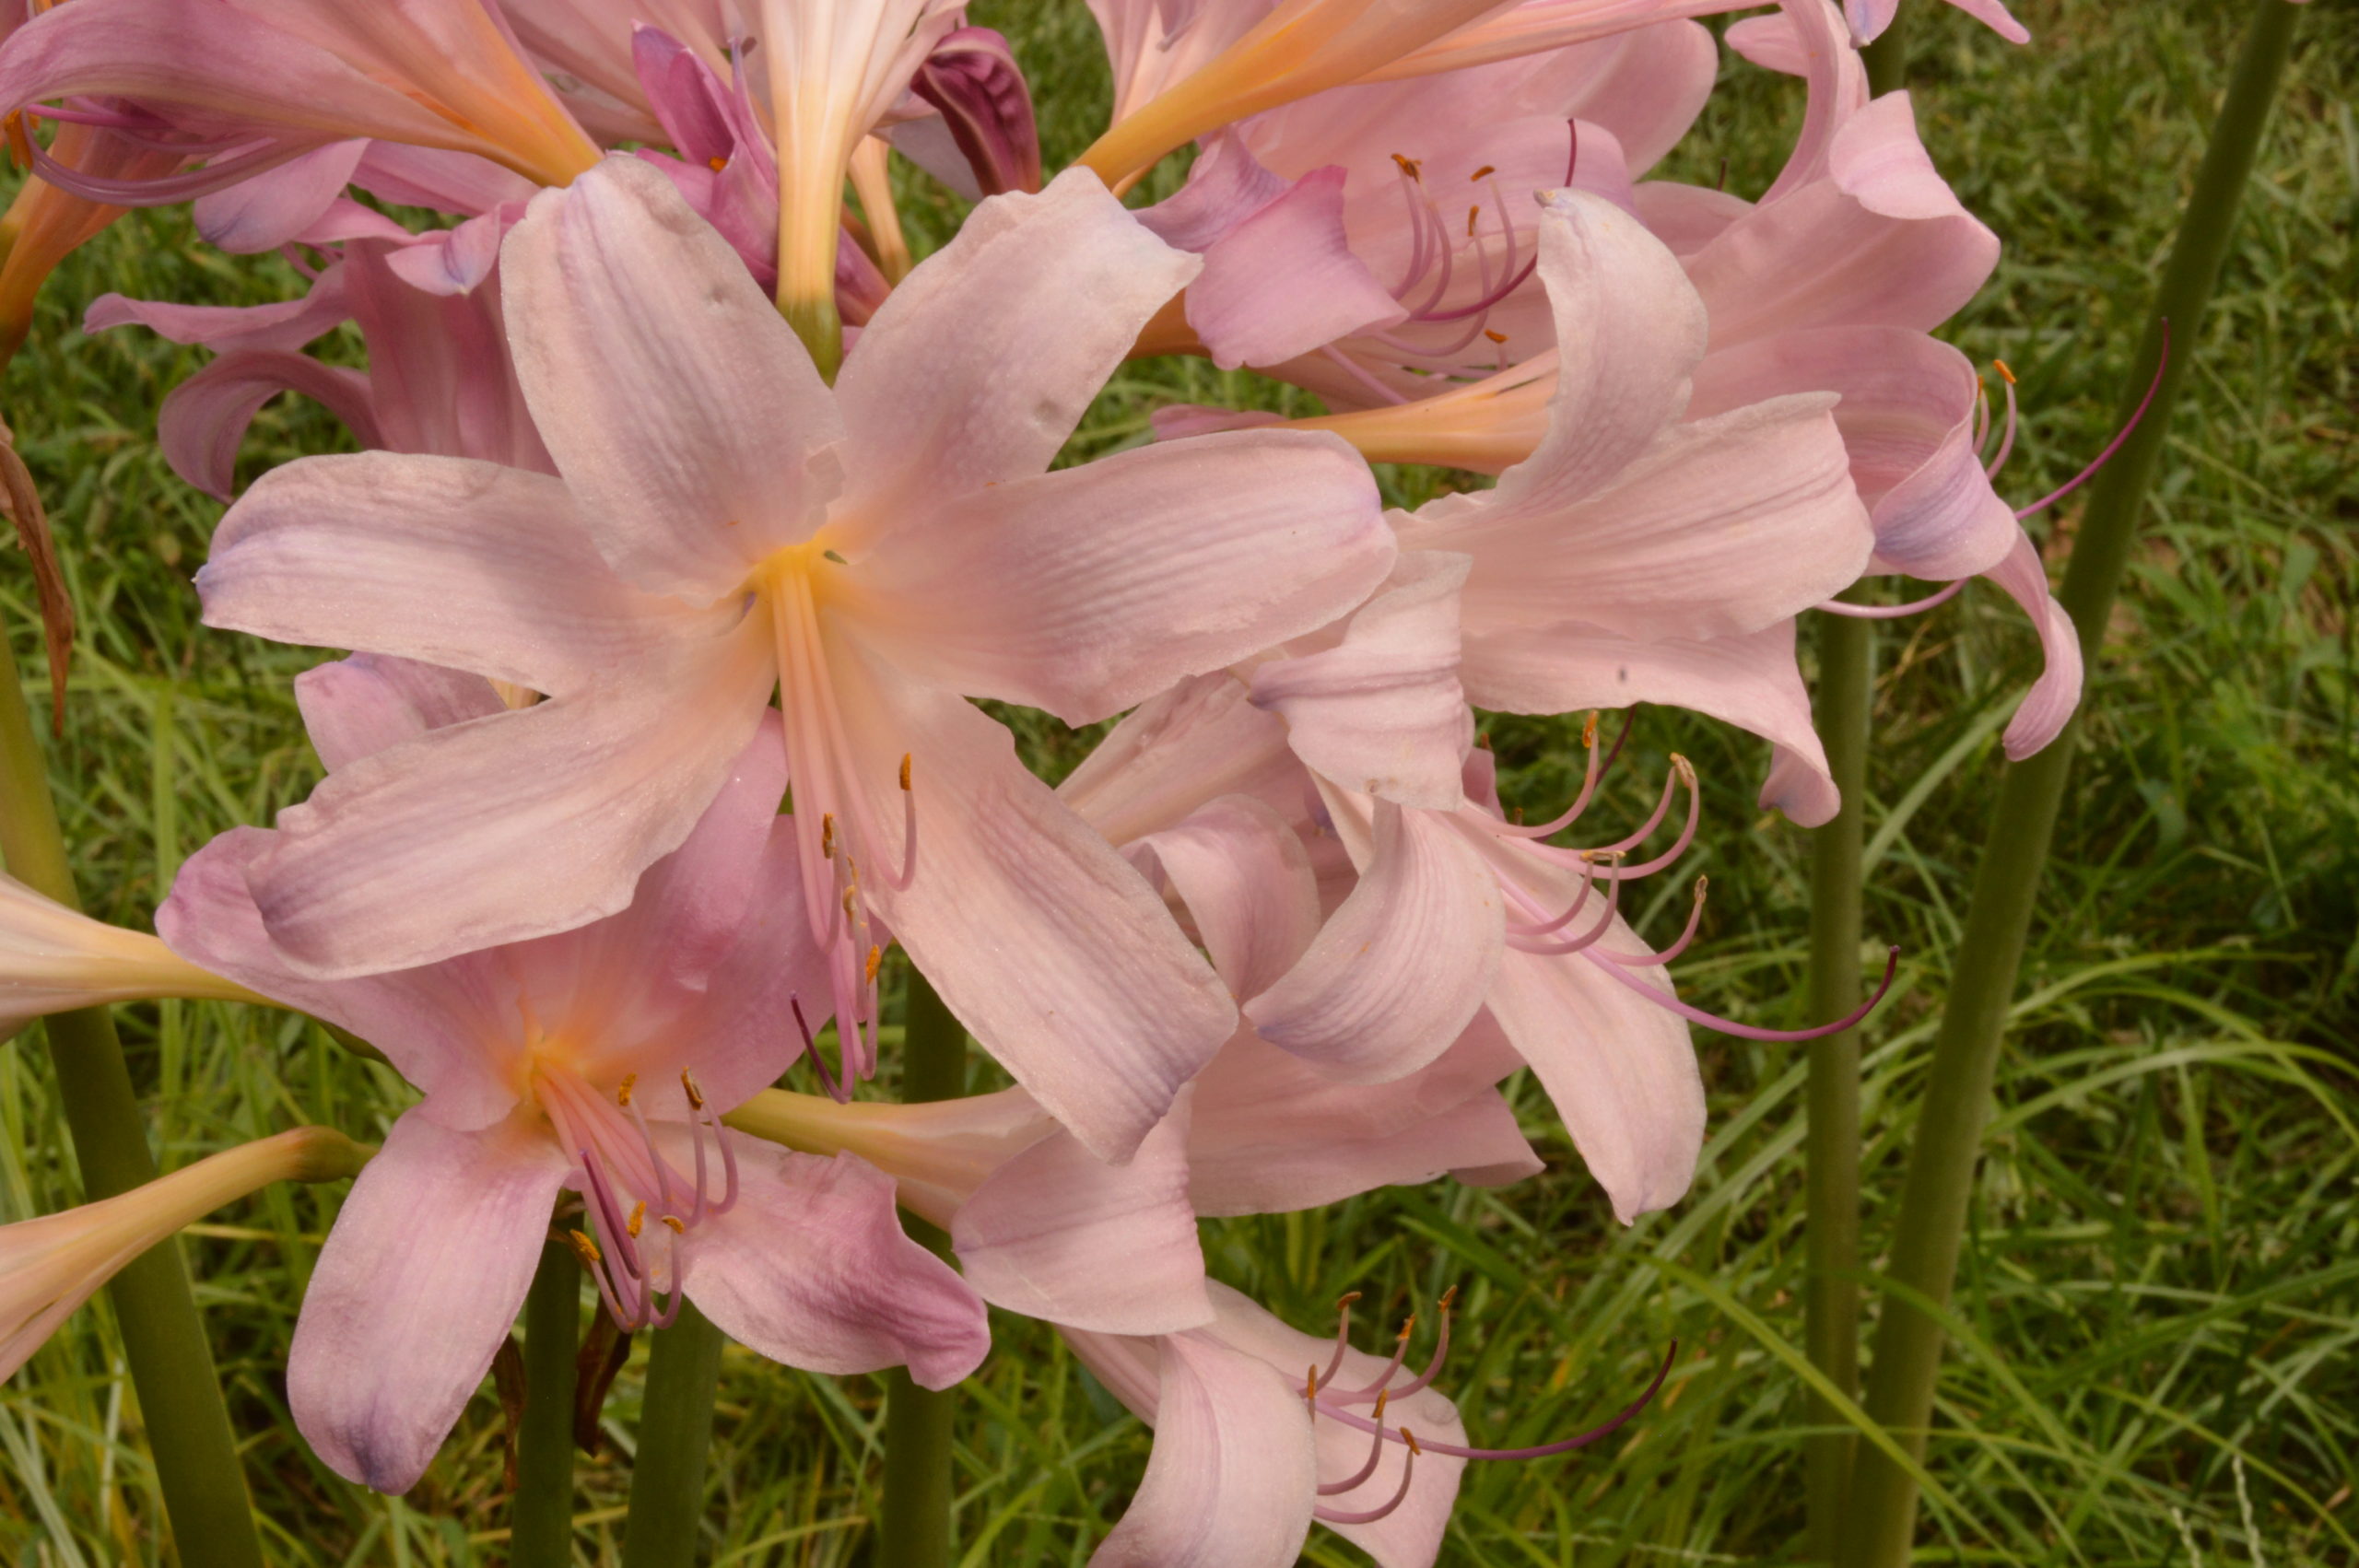 cluster of pink lily-like lycoris flowers